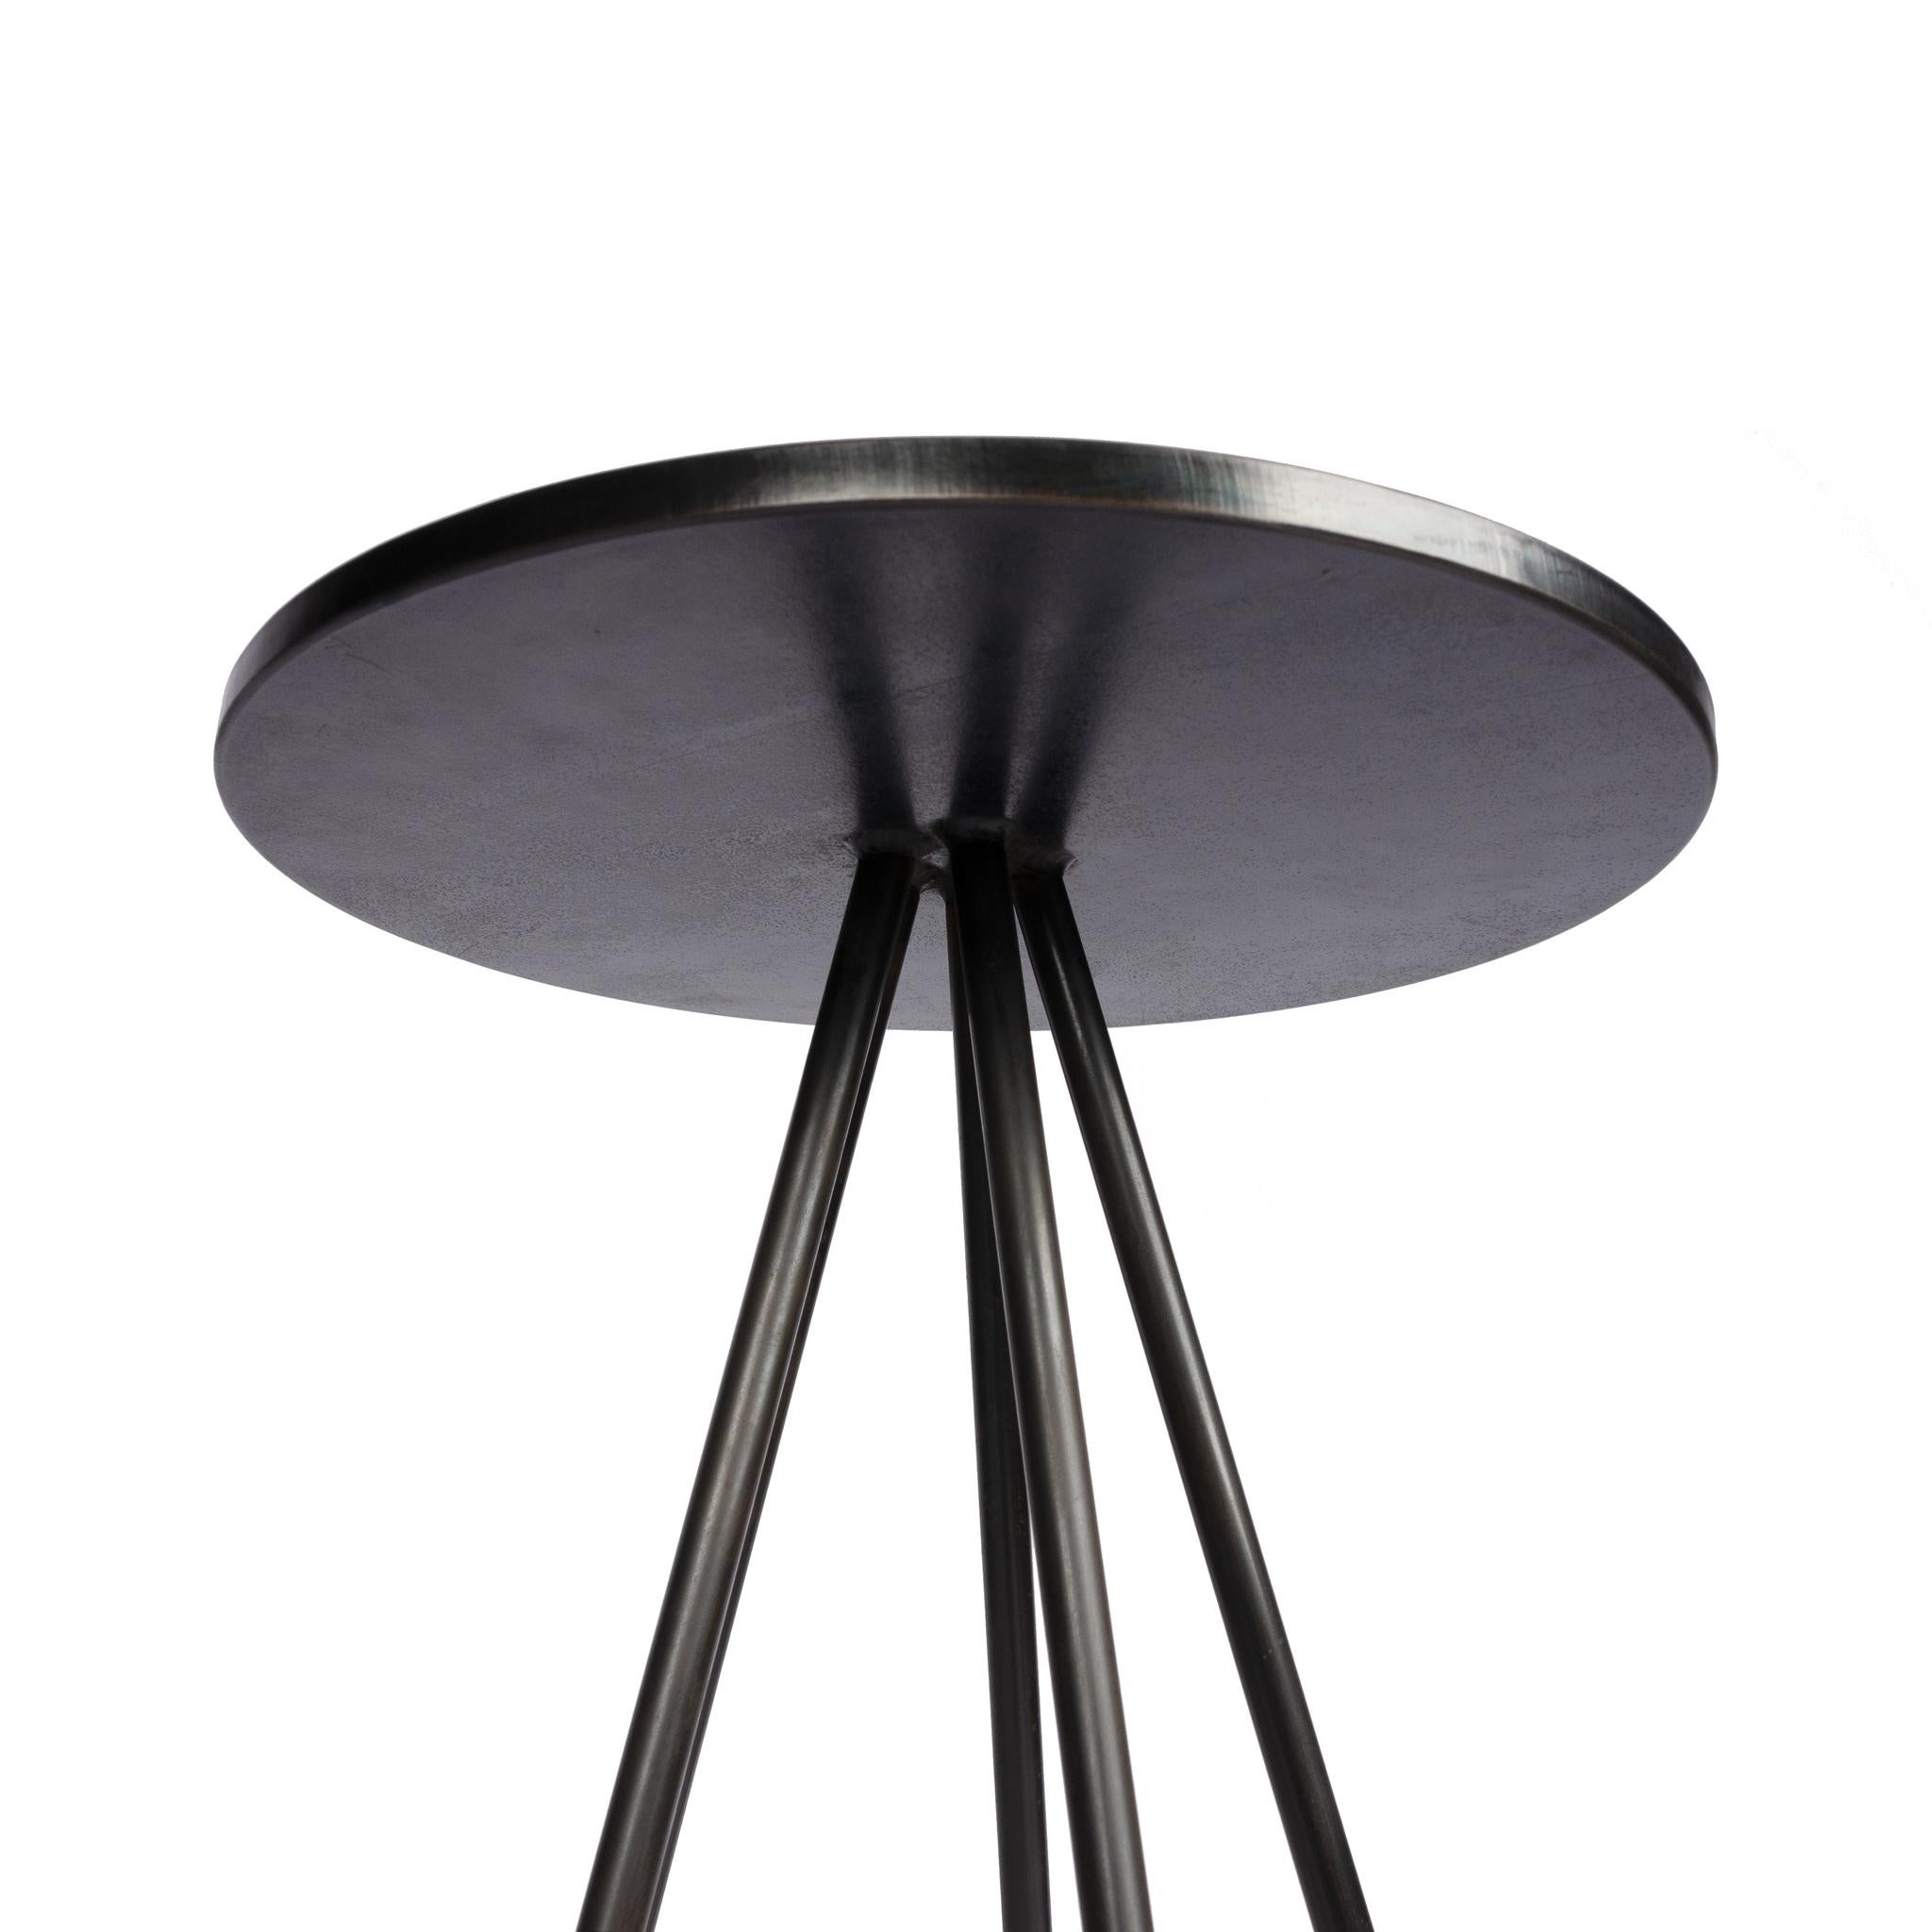 American Urban Industrial Five Leg Round Bar Stool Backless Metal Seat Blackened Finish For Sale